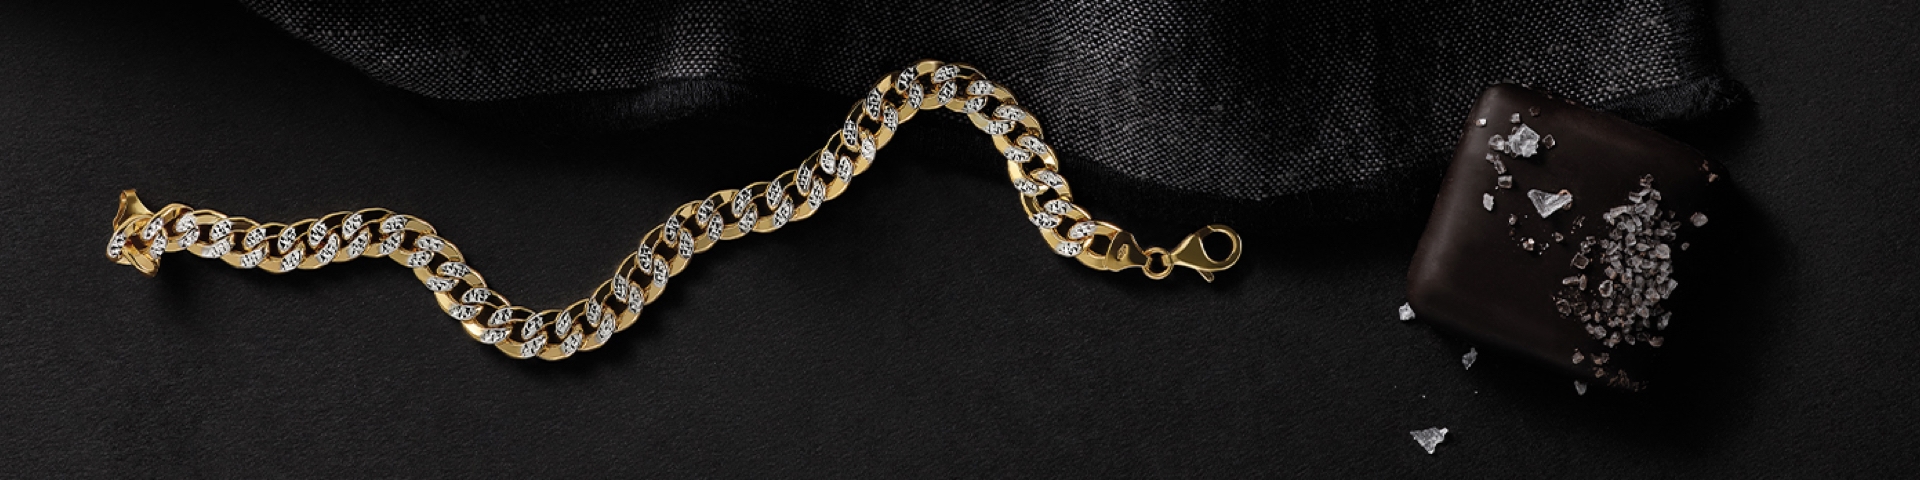 Men's yellow gold link chain bracelet with diamonds on a black textured background